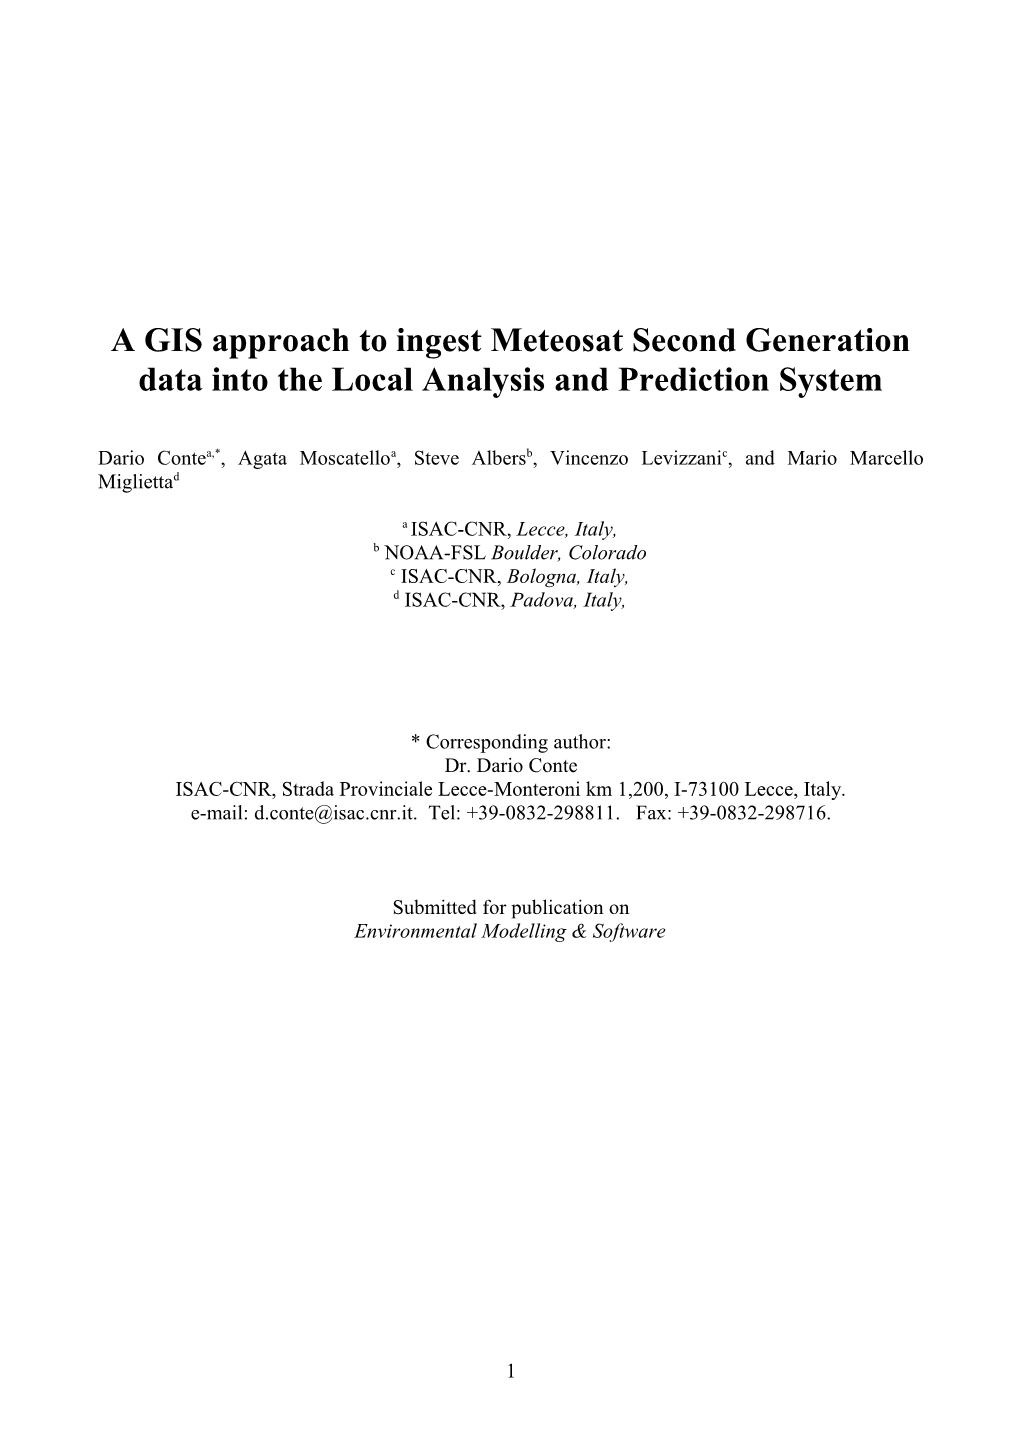 A GIS Approach to Ingest Meteosat Second Generation Data Into the Local Analysis and Prediction